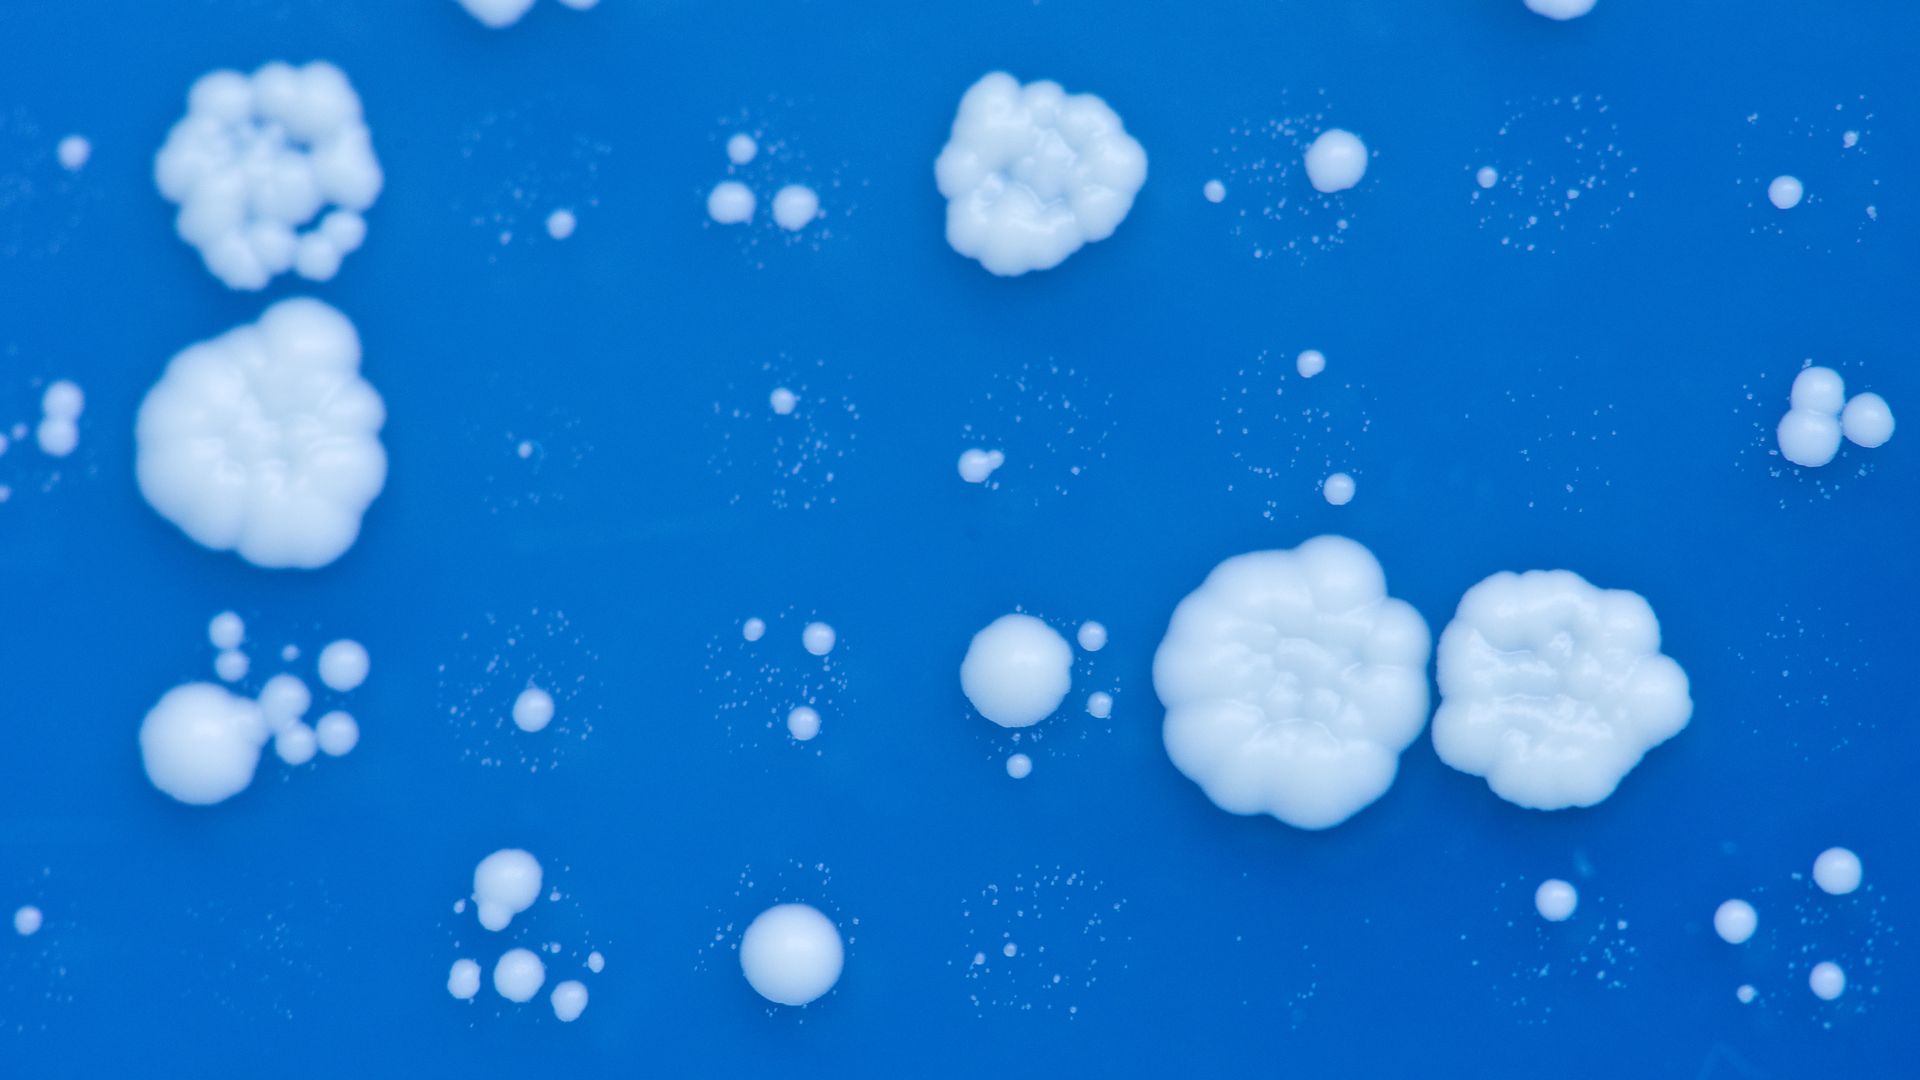 Photo of brewer's yeast cells on blue background